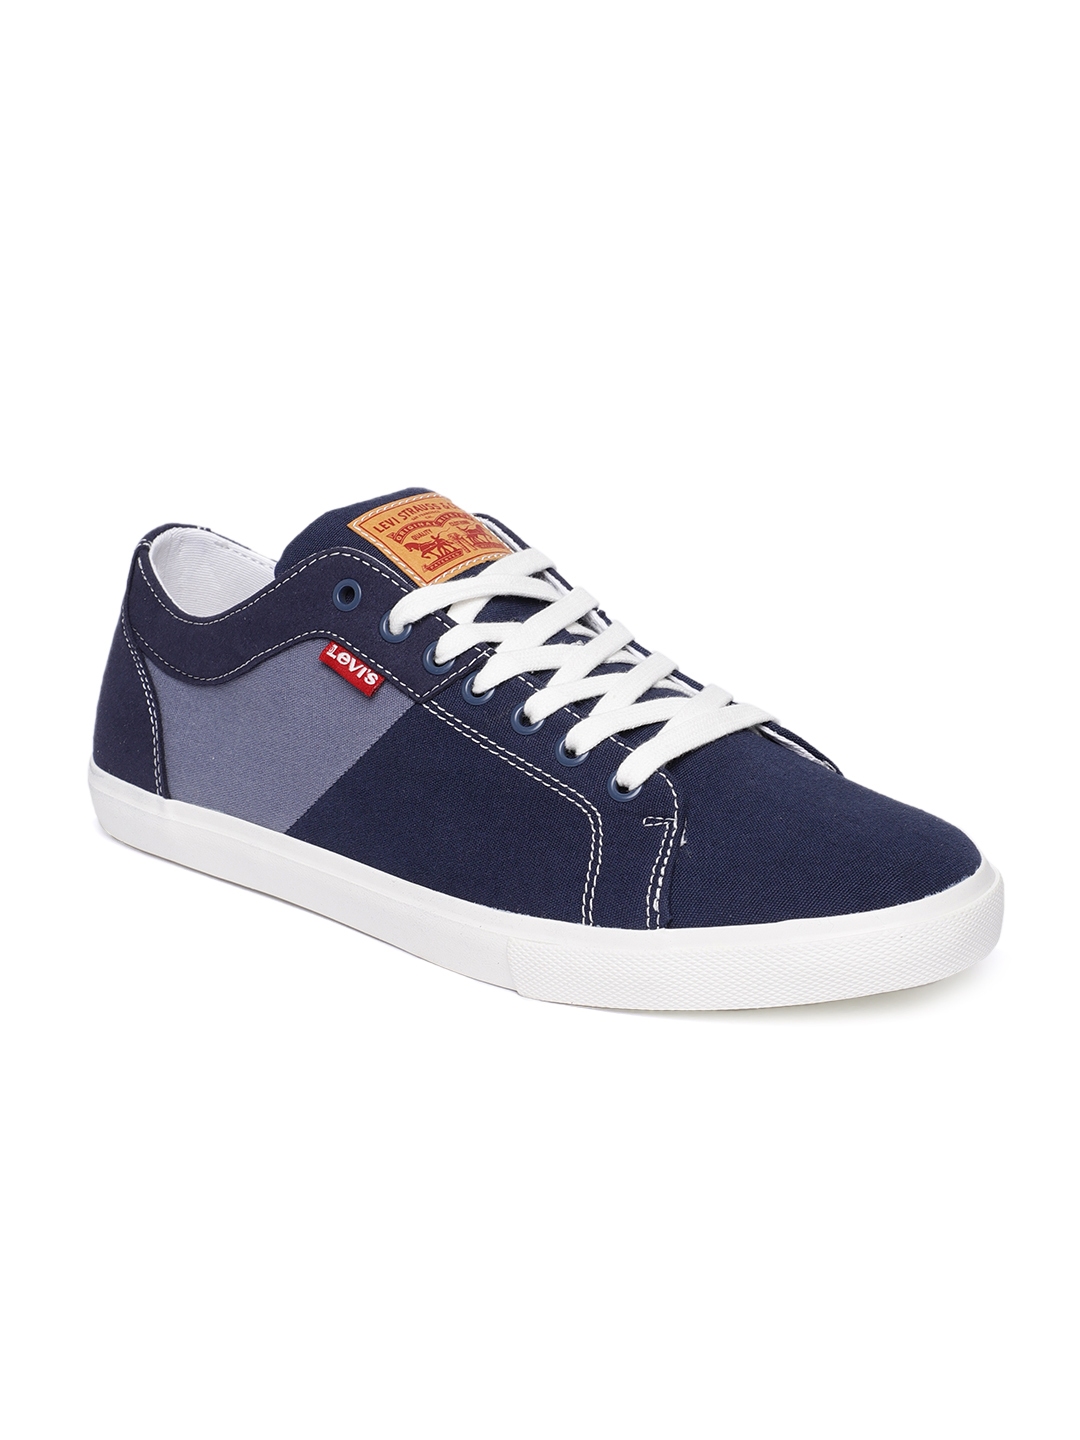 Buy Levis Men Navy Blue Solid Sneakers - Casual Shoes for Men 9035961 |  Myntra